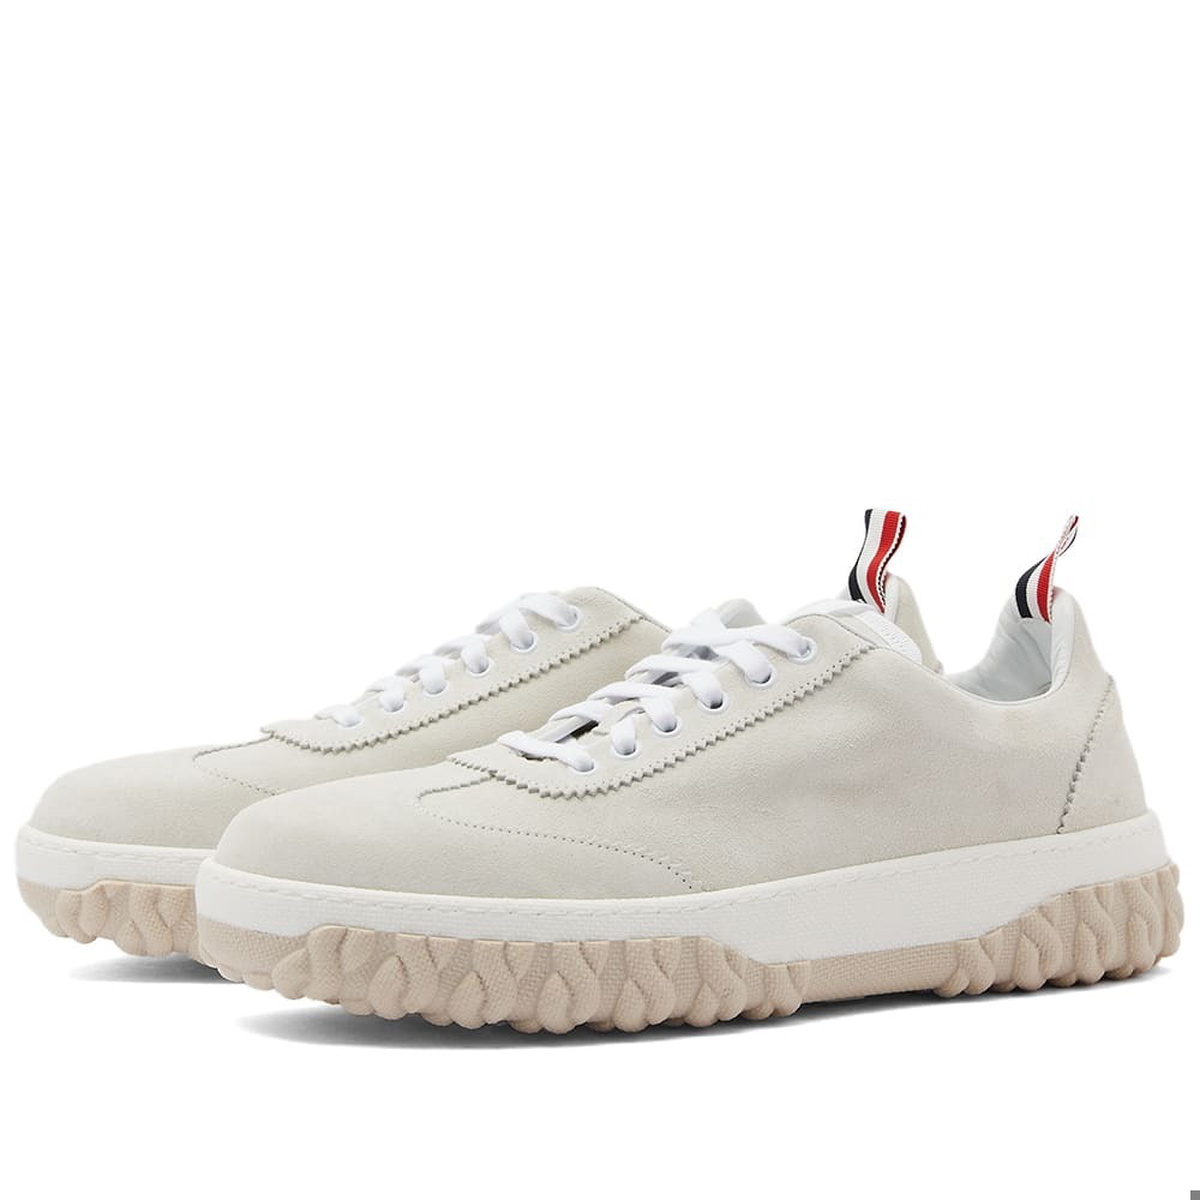 Thom Browne Men's Court Sneakers in White Thom Browne